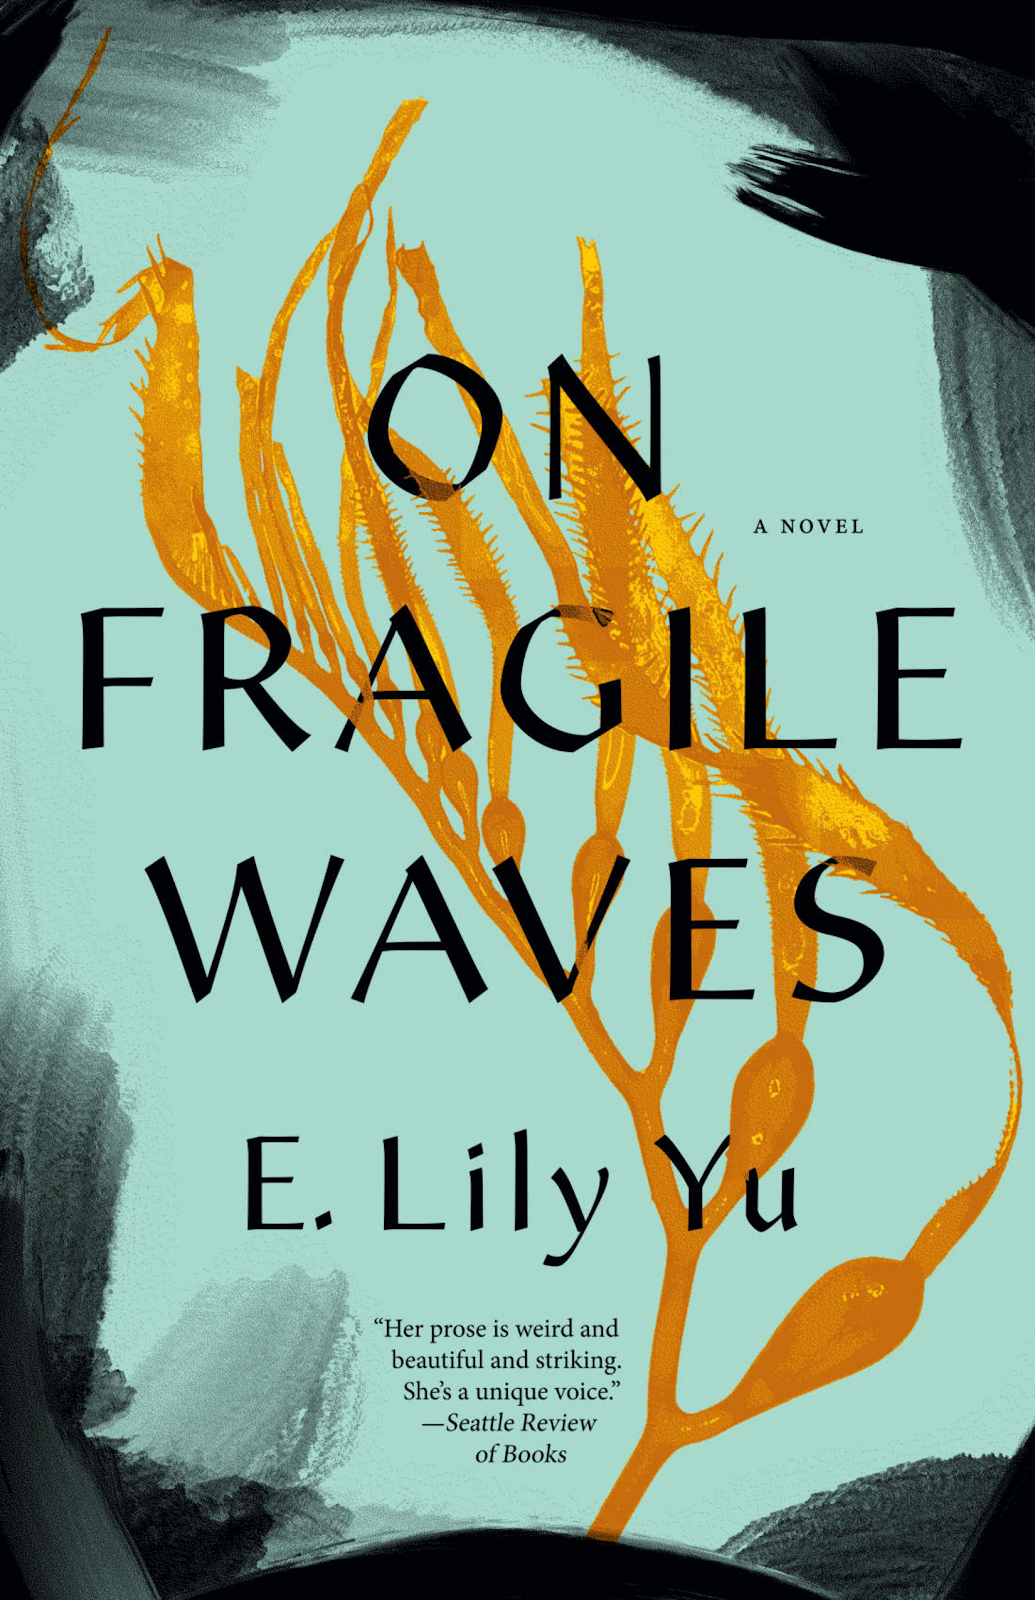 On Fragile Waves book cover